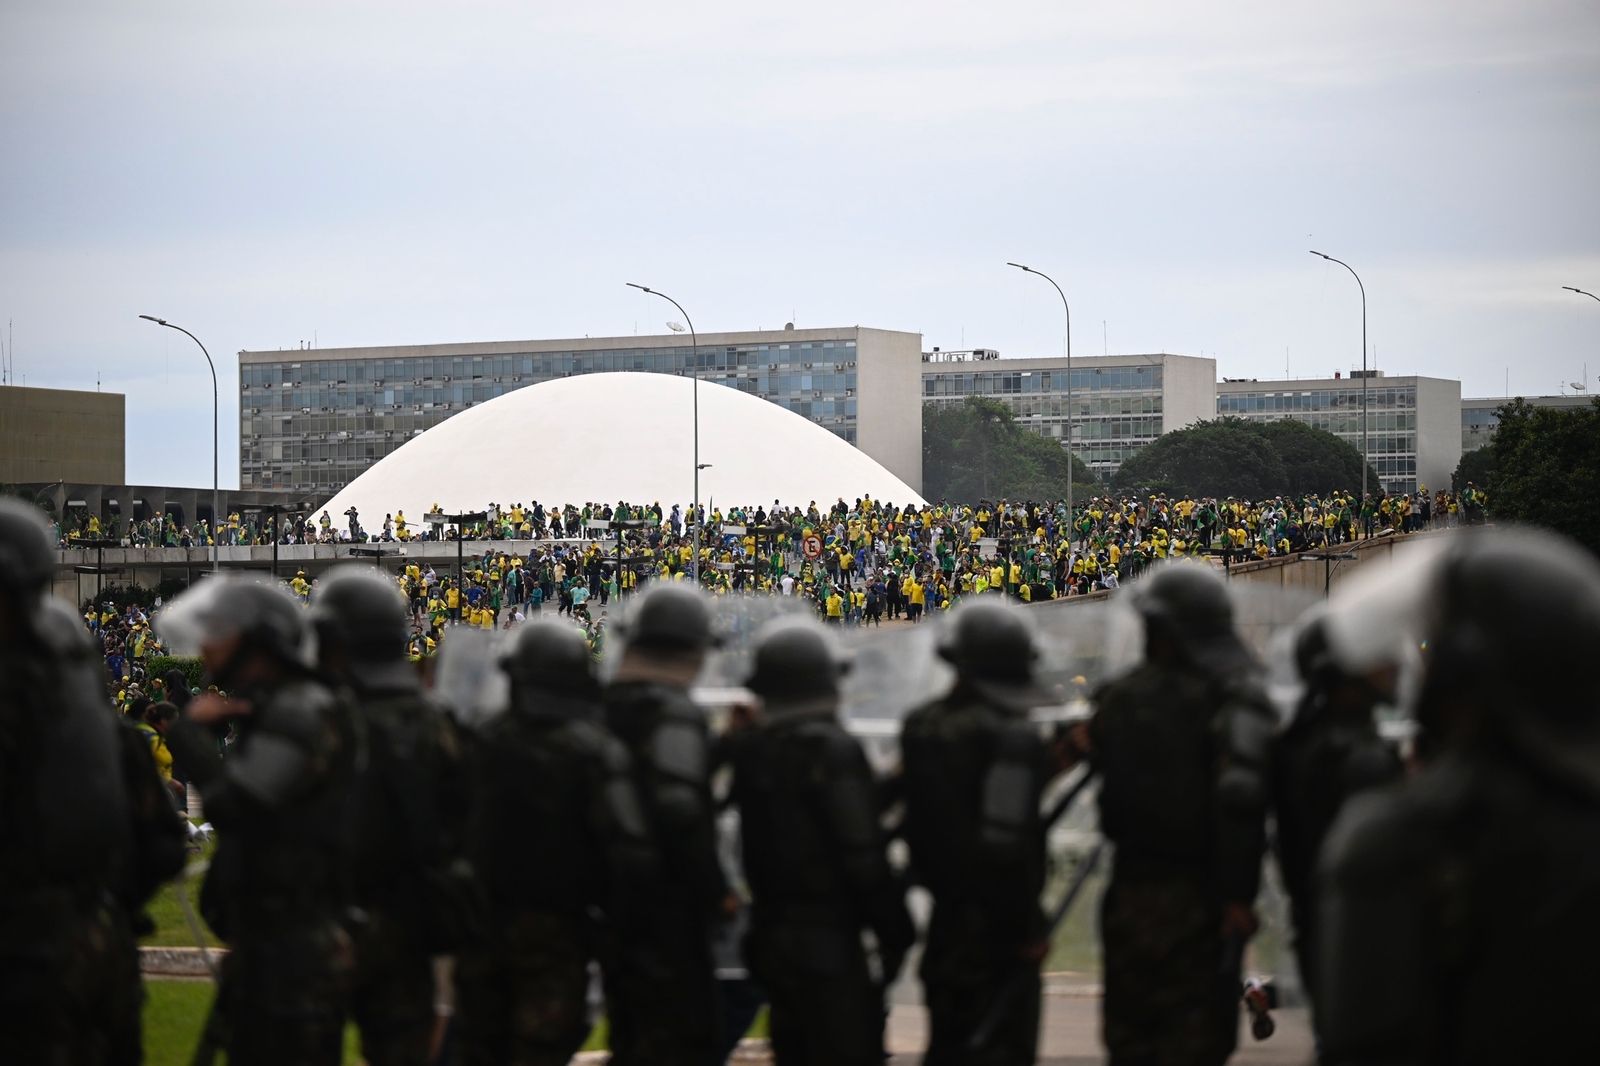 A line of police before a crowd of supporters near the National Congress in Brasilia on Jan. 8.